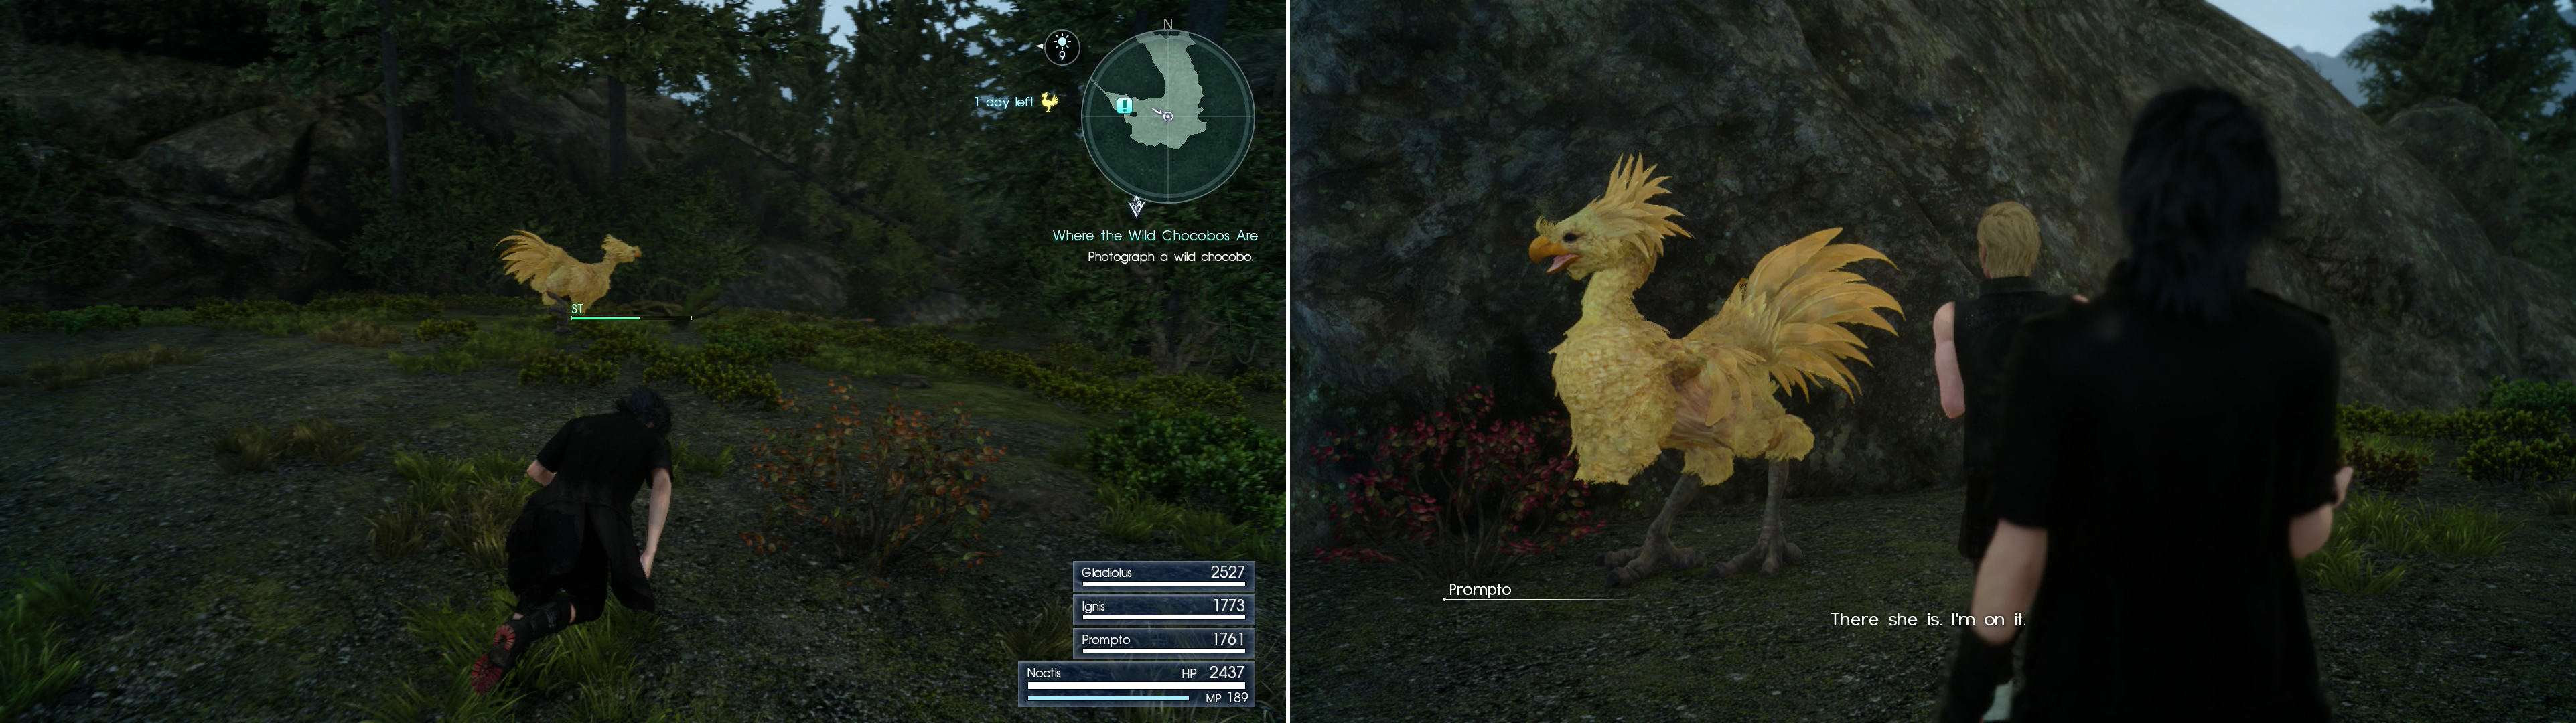 Chase down the wild Chocobo for Wiz (left) so Prompto can take its picture (right).